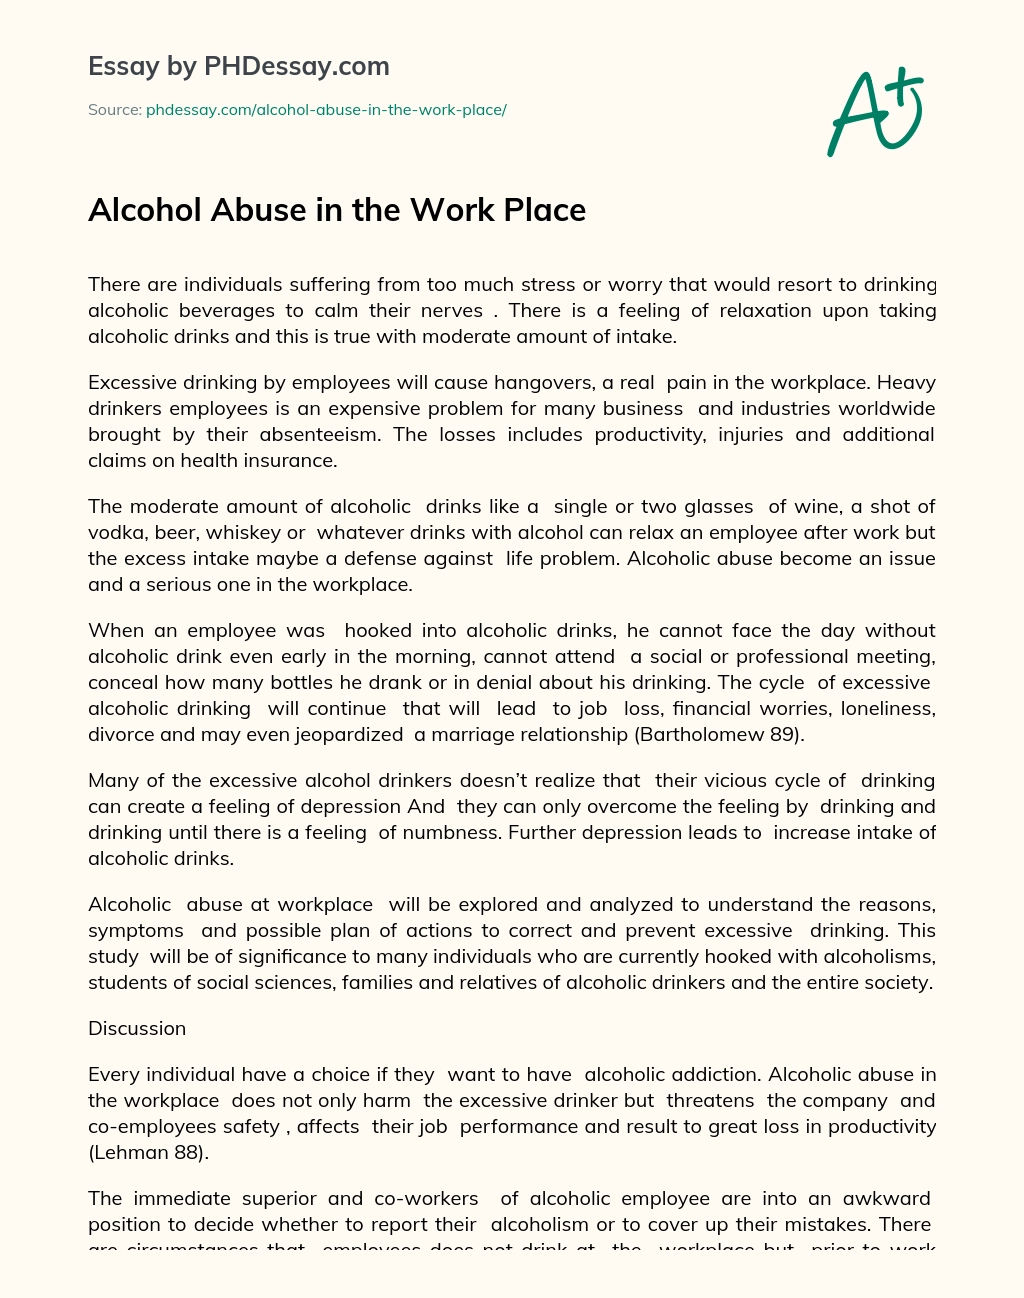 Alcohol Abuse in the Work Place essay